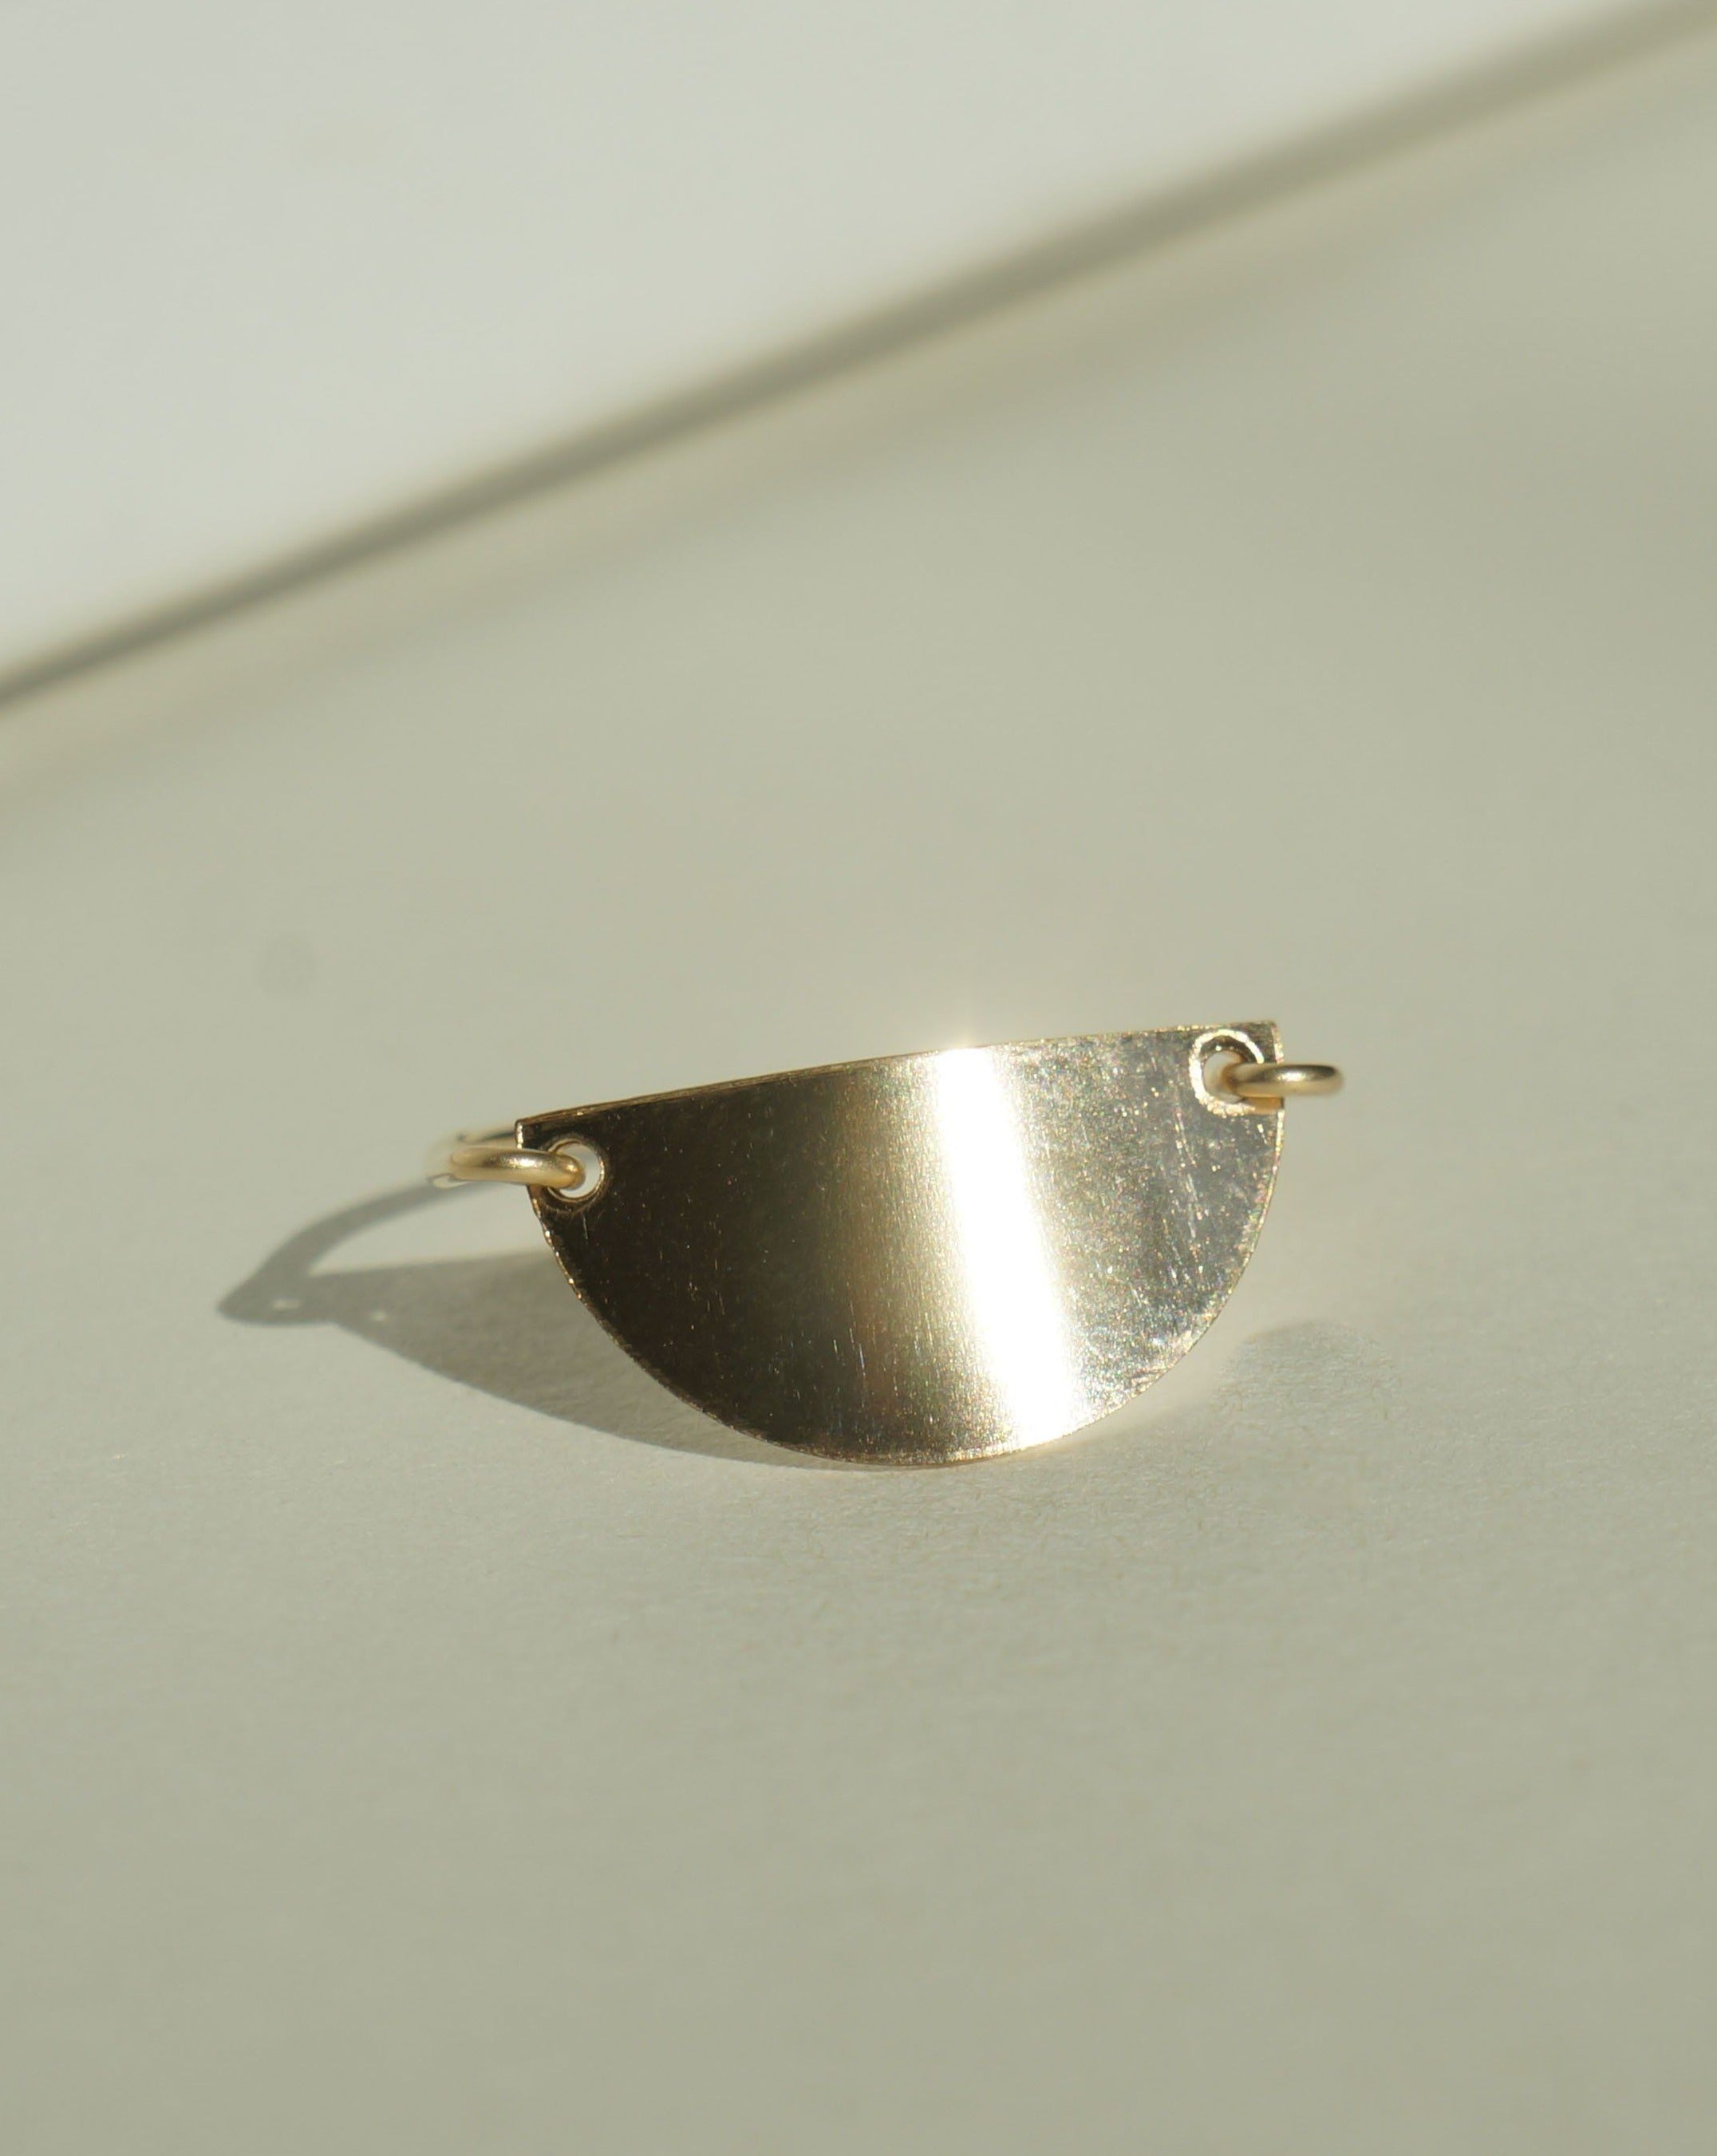 Meda Ring by KOZAKH. A 1mm band crafted in 14K Gold Filled, featuring a half moon shaped flat metal.